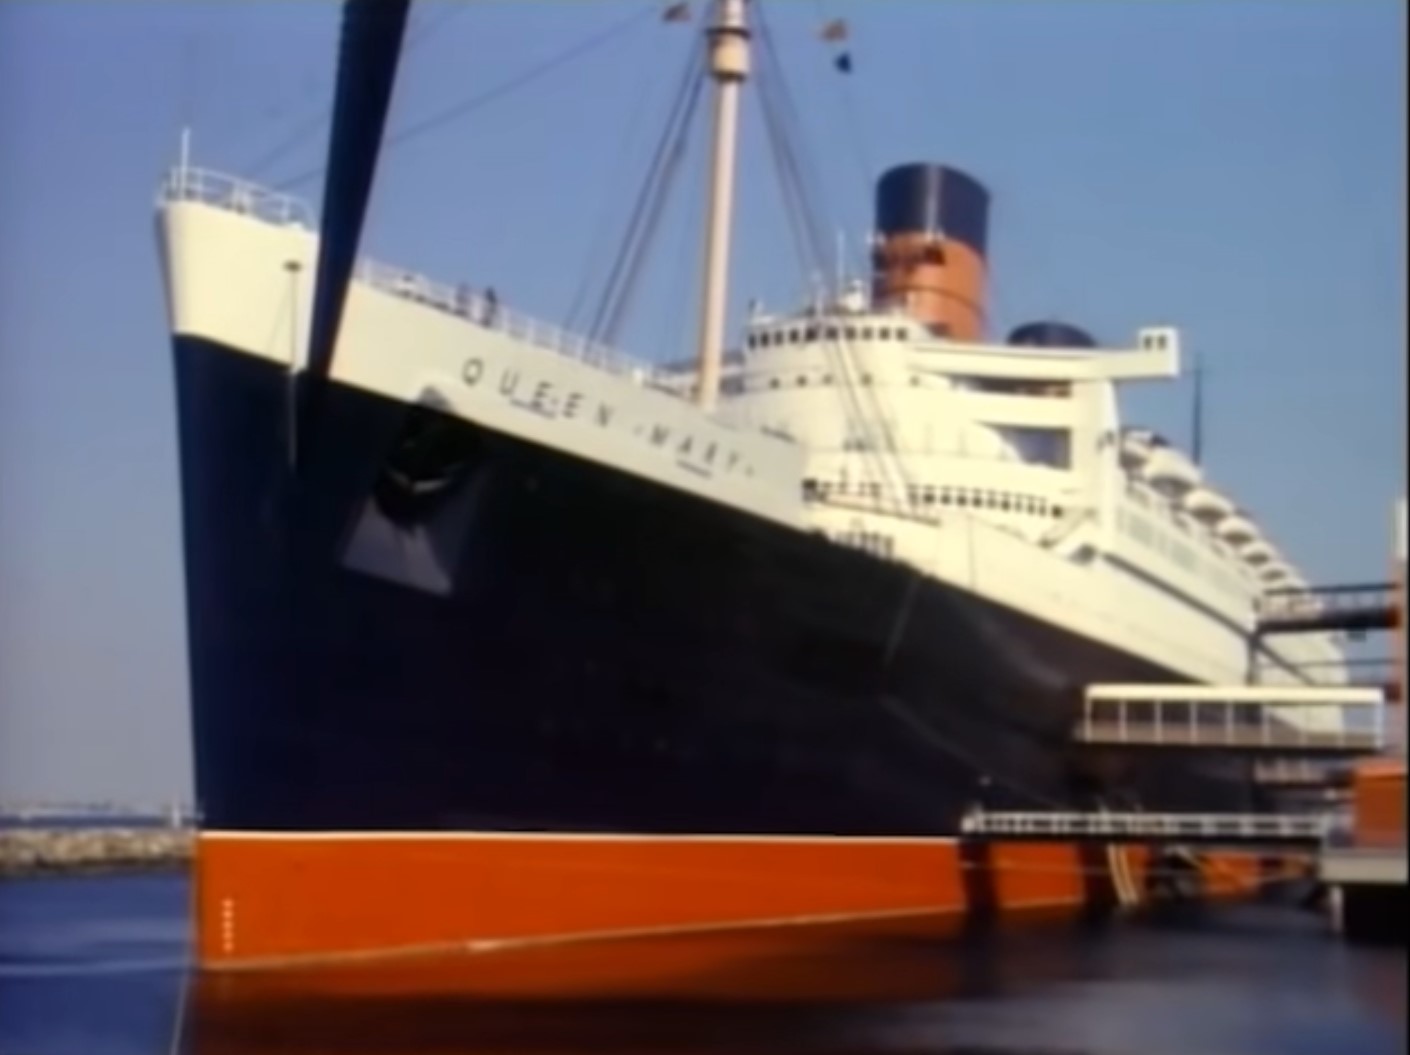 The Queen Mary | Unsolved Mysteries Wiki | Fandom